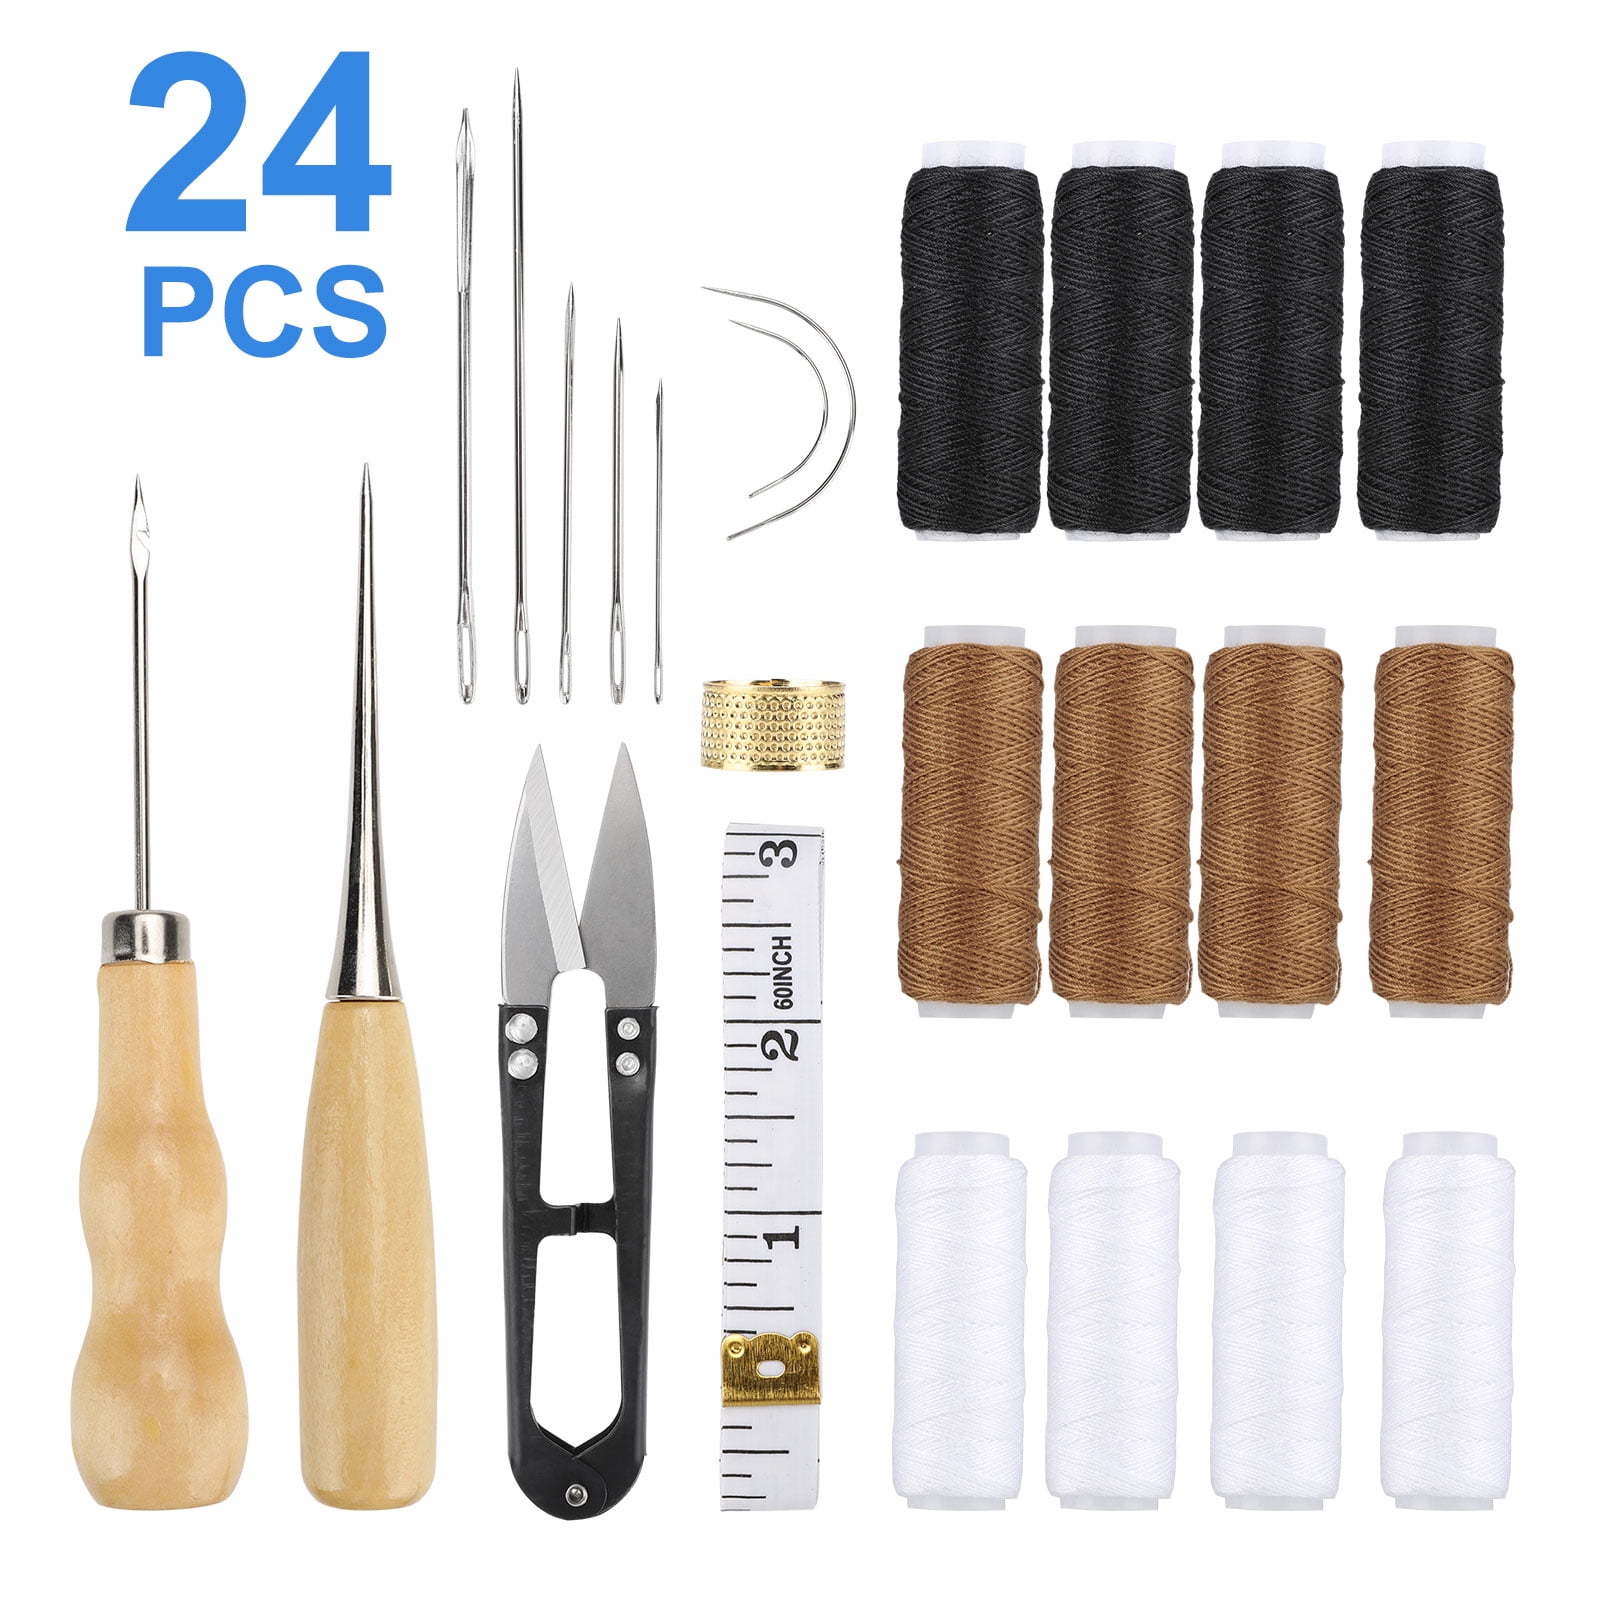 Leather Sewing Repair Kit with Sewing Thread Awl Large-Eye Stitching Needles Leather Craft Tool Kit for Leather Repair Leather Hand Sewing Needles Sewing Stitching 30 PCS Upholstery Repair Kit 